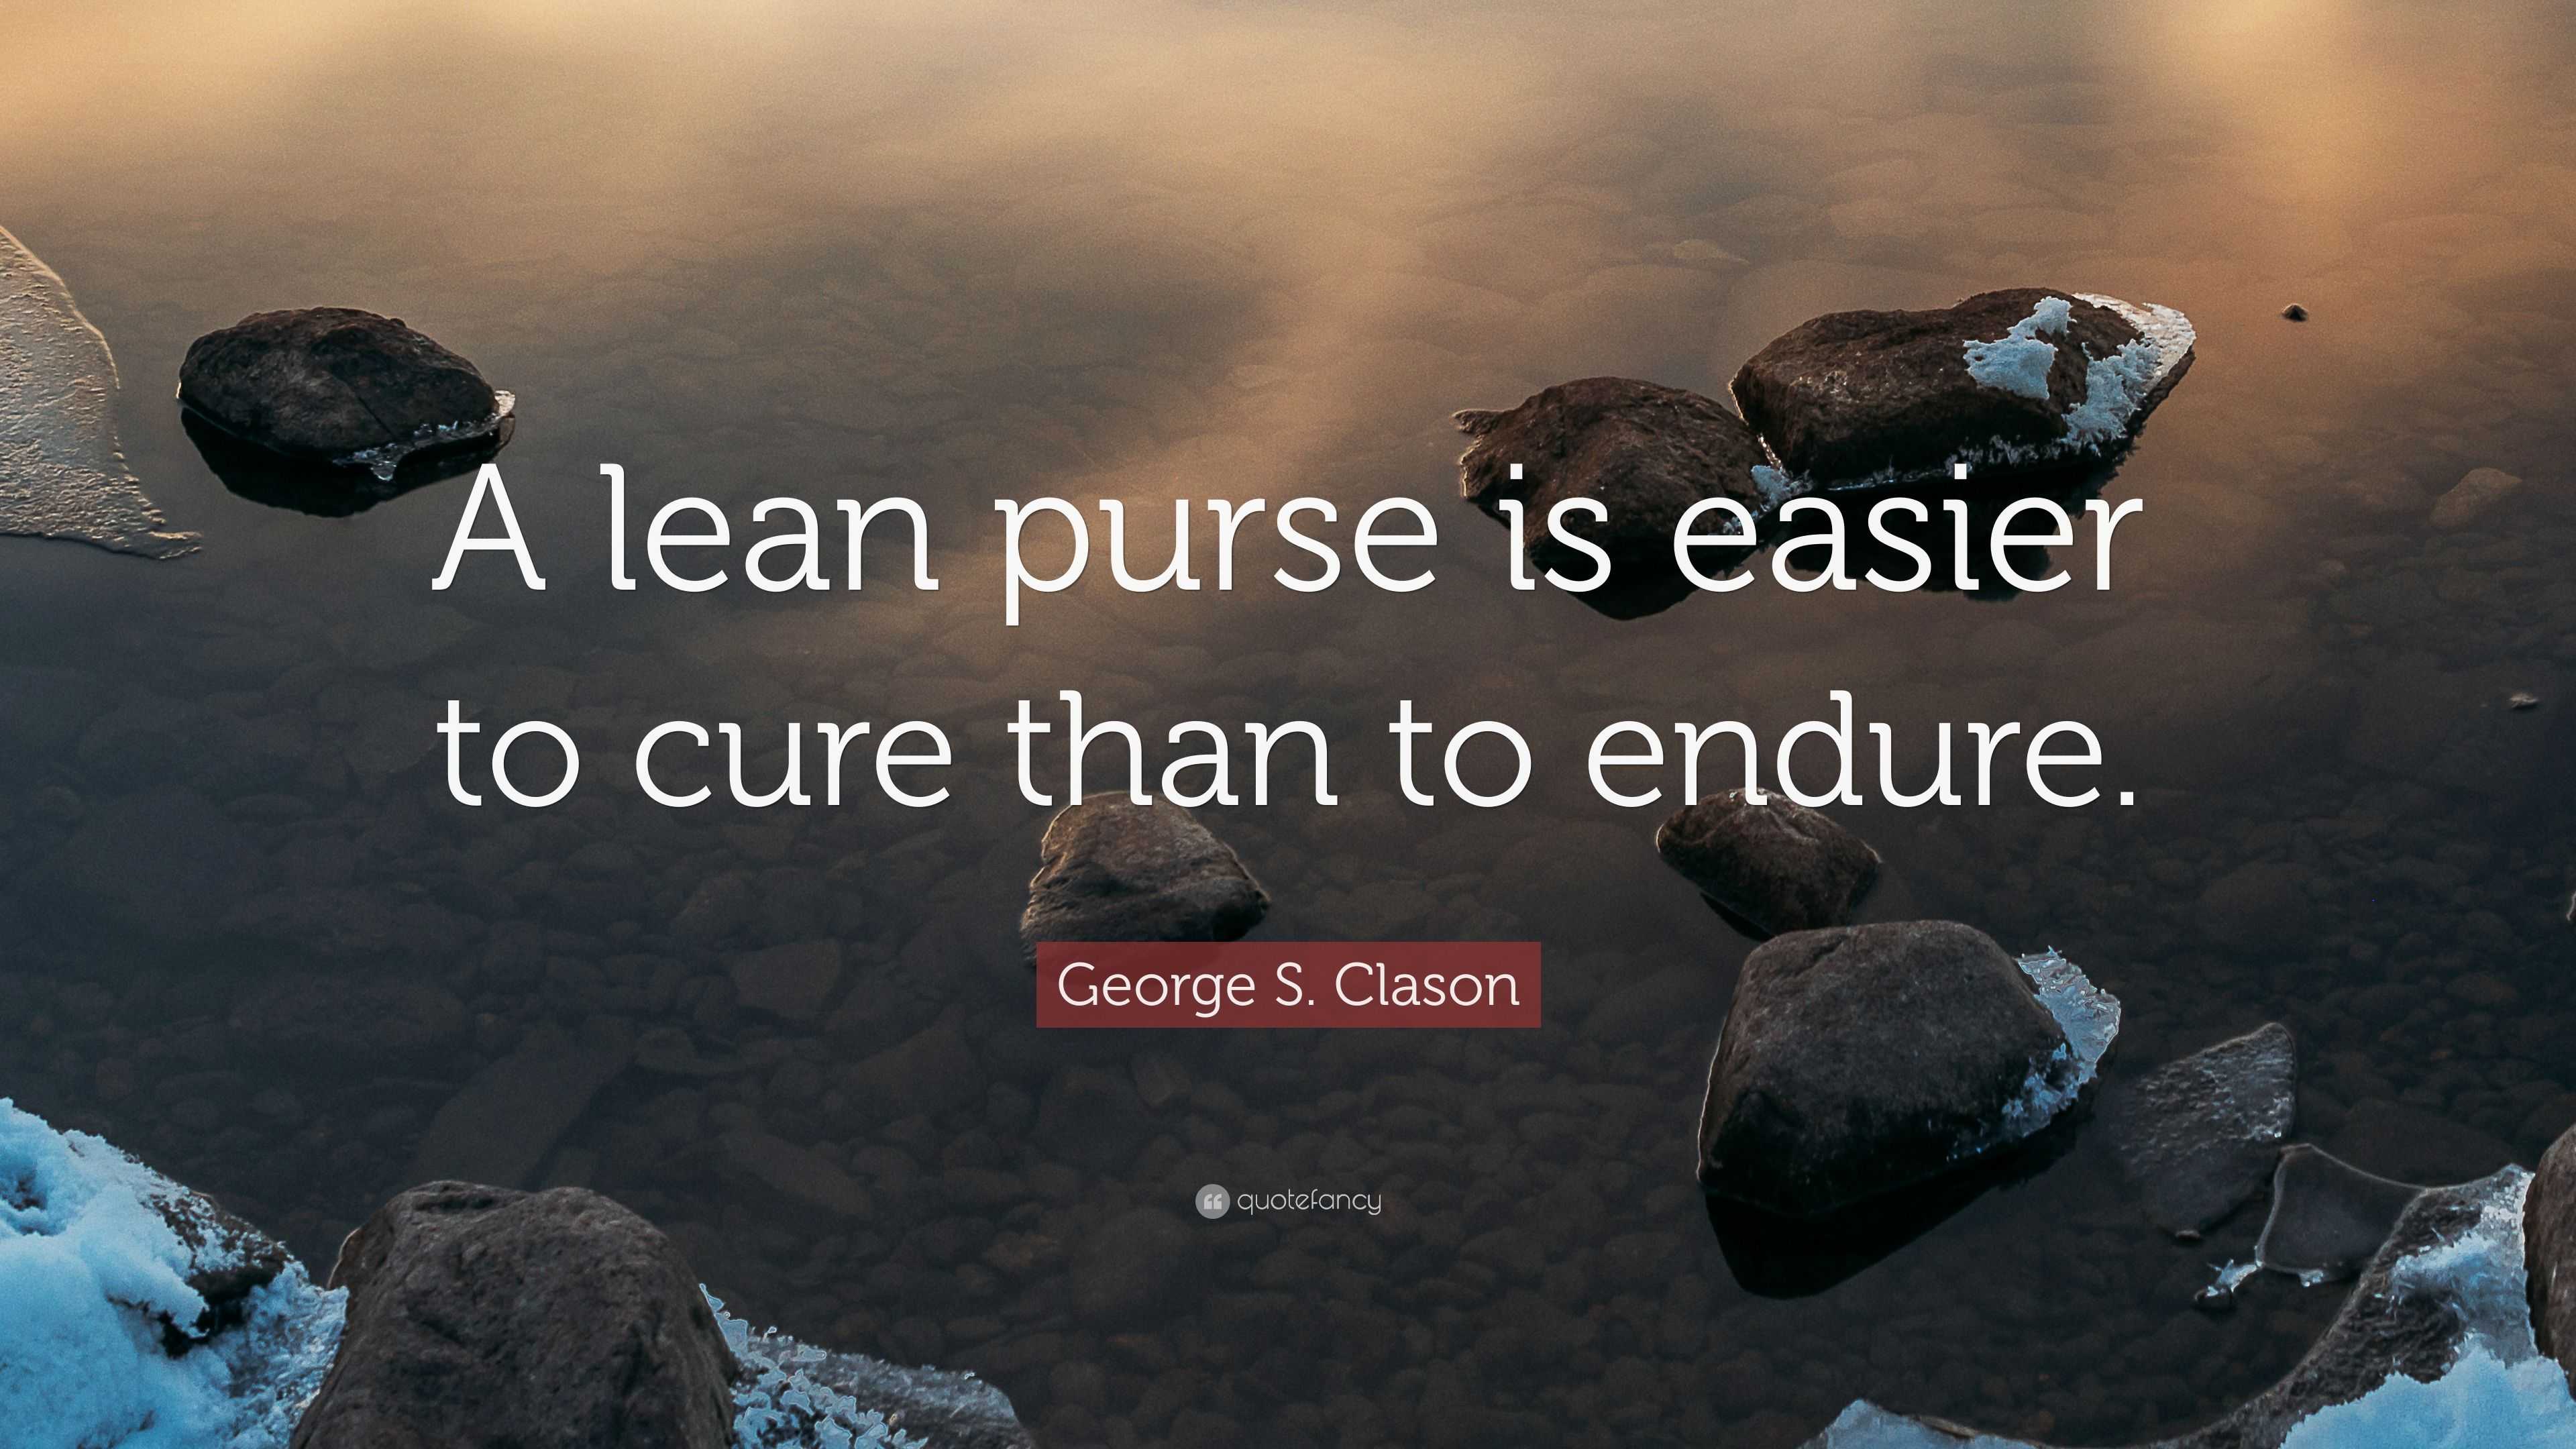 Richest Man In Babylon: 7 Cures for a Lean Purse - Invest Mindset